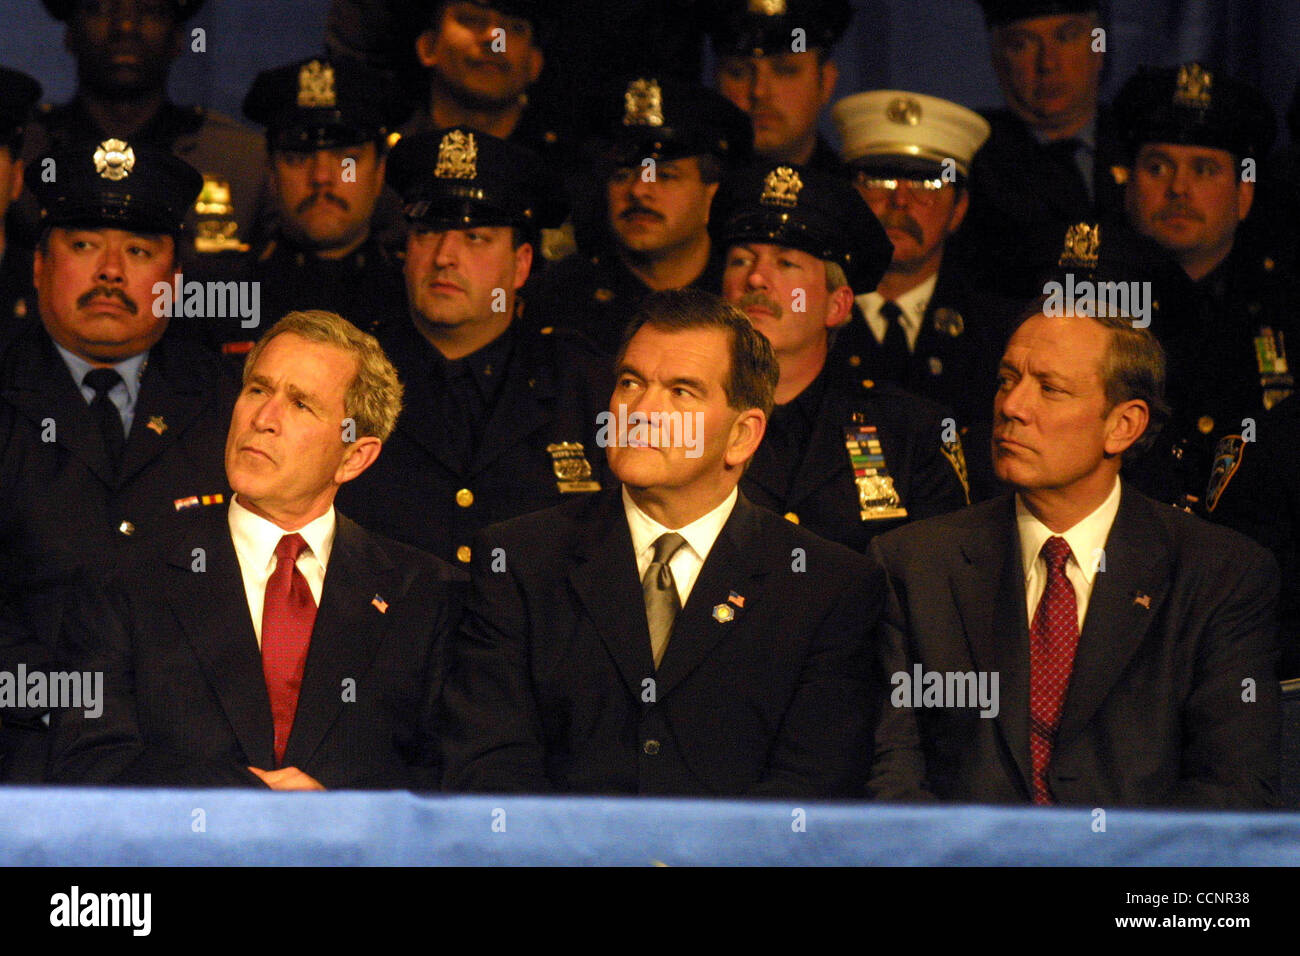 Feb 06, 2002; New York, NY, USA; President GEORGE W. BUSH, Director of Homeland Security TOM RIDGE & NY Governor GEORGE PATAKI @ an address to New York's First Responsers (firemen & police) about Homeland Security issues @ the Sheraton. Mandatory Credit: Photo by Nancy Kaszerman/ZUMA Press. (©) Copy Stock Photo